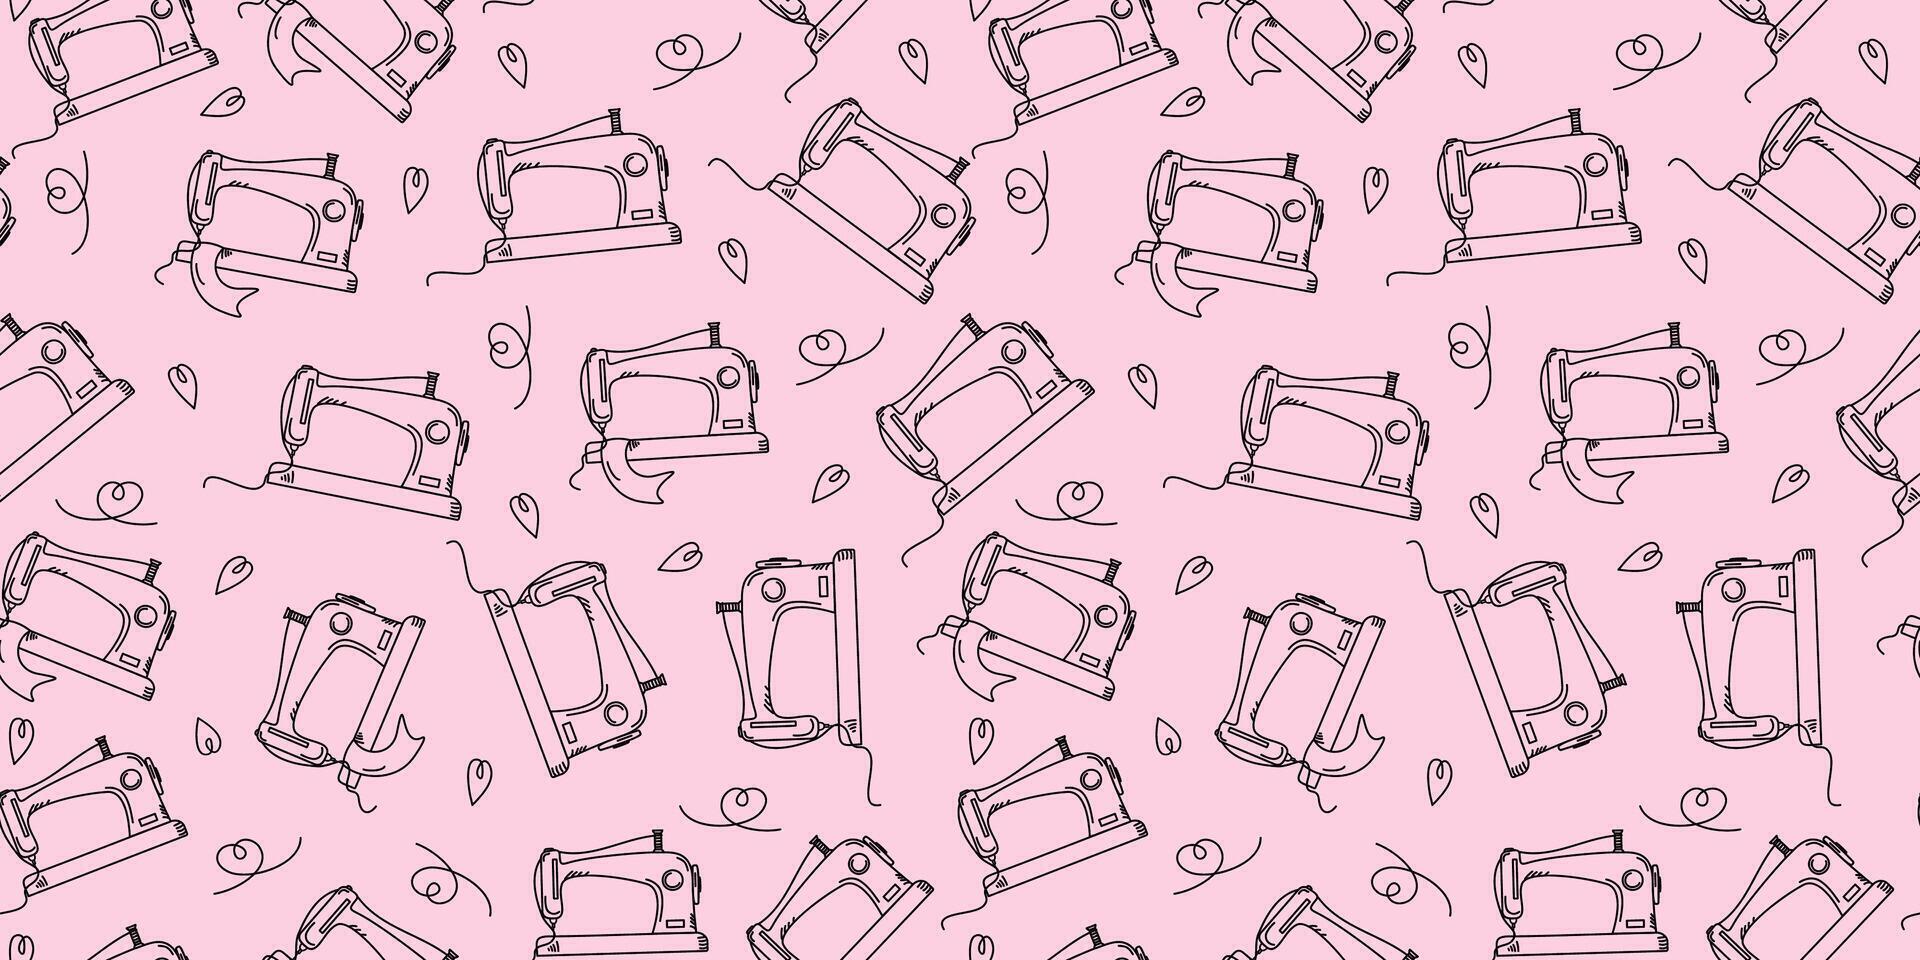 Handmade, hobby. Pattern. Sewing icon. Sewing machine. Drawing, sketch, doodle. Seamless background. vector